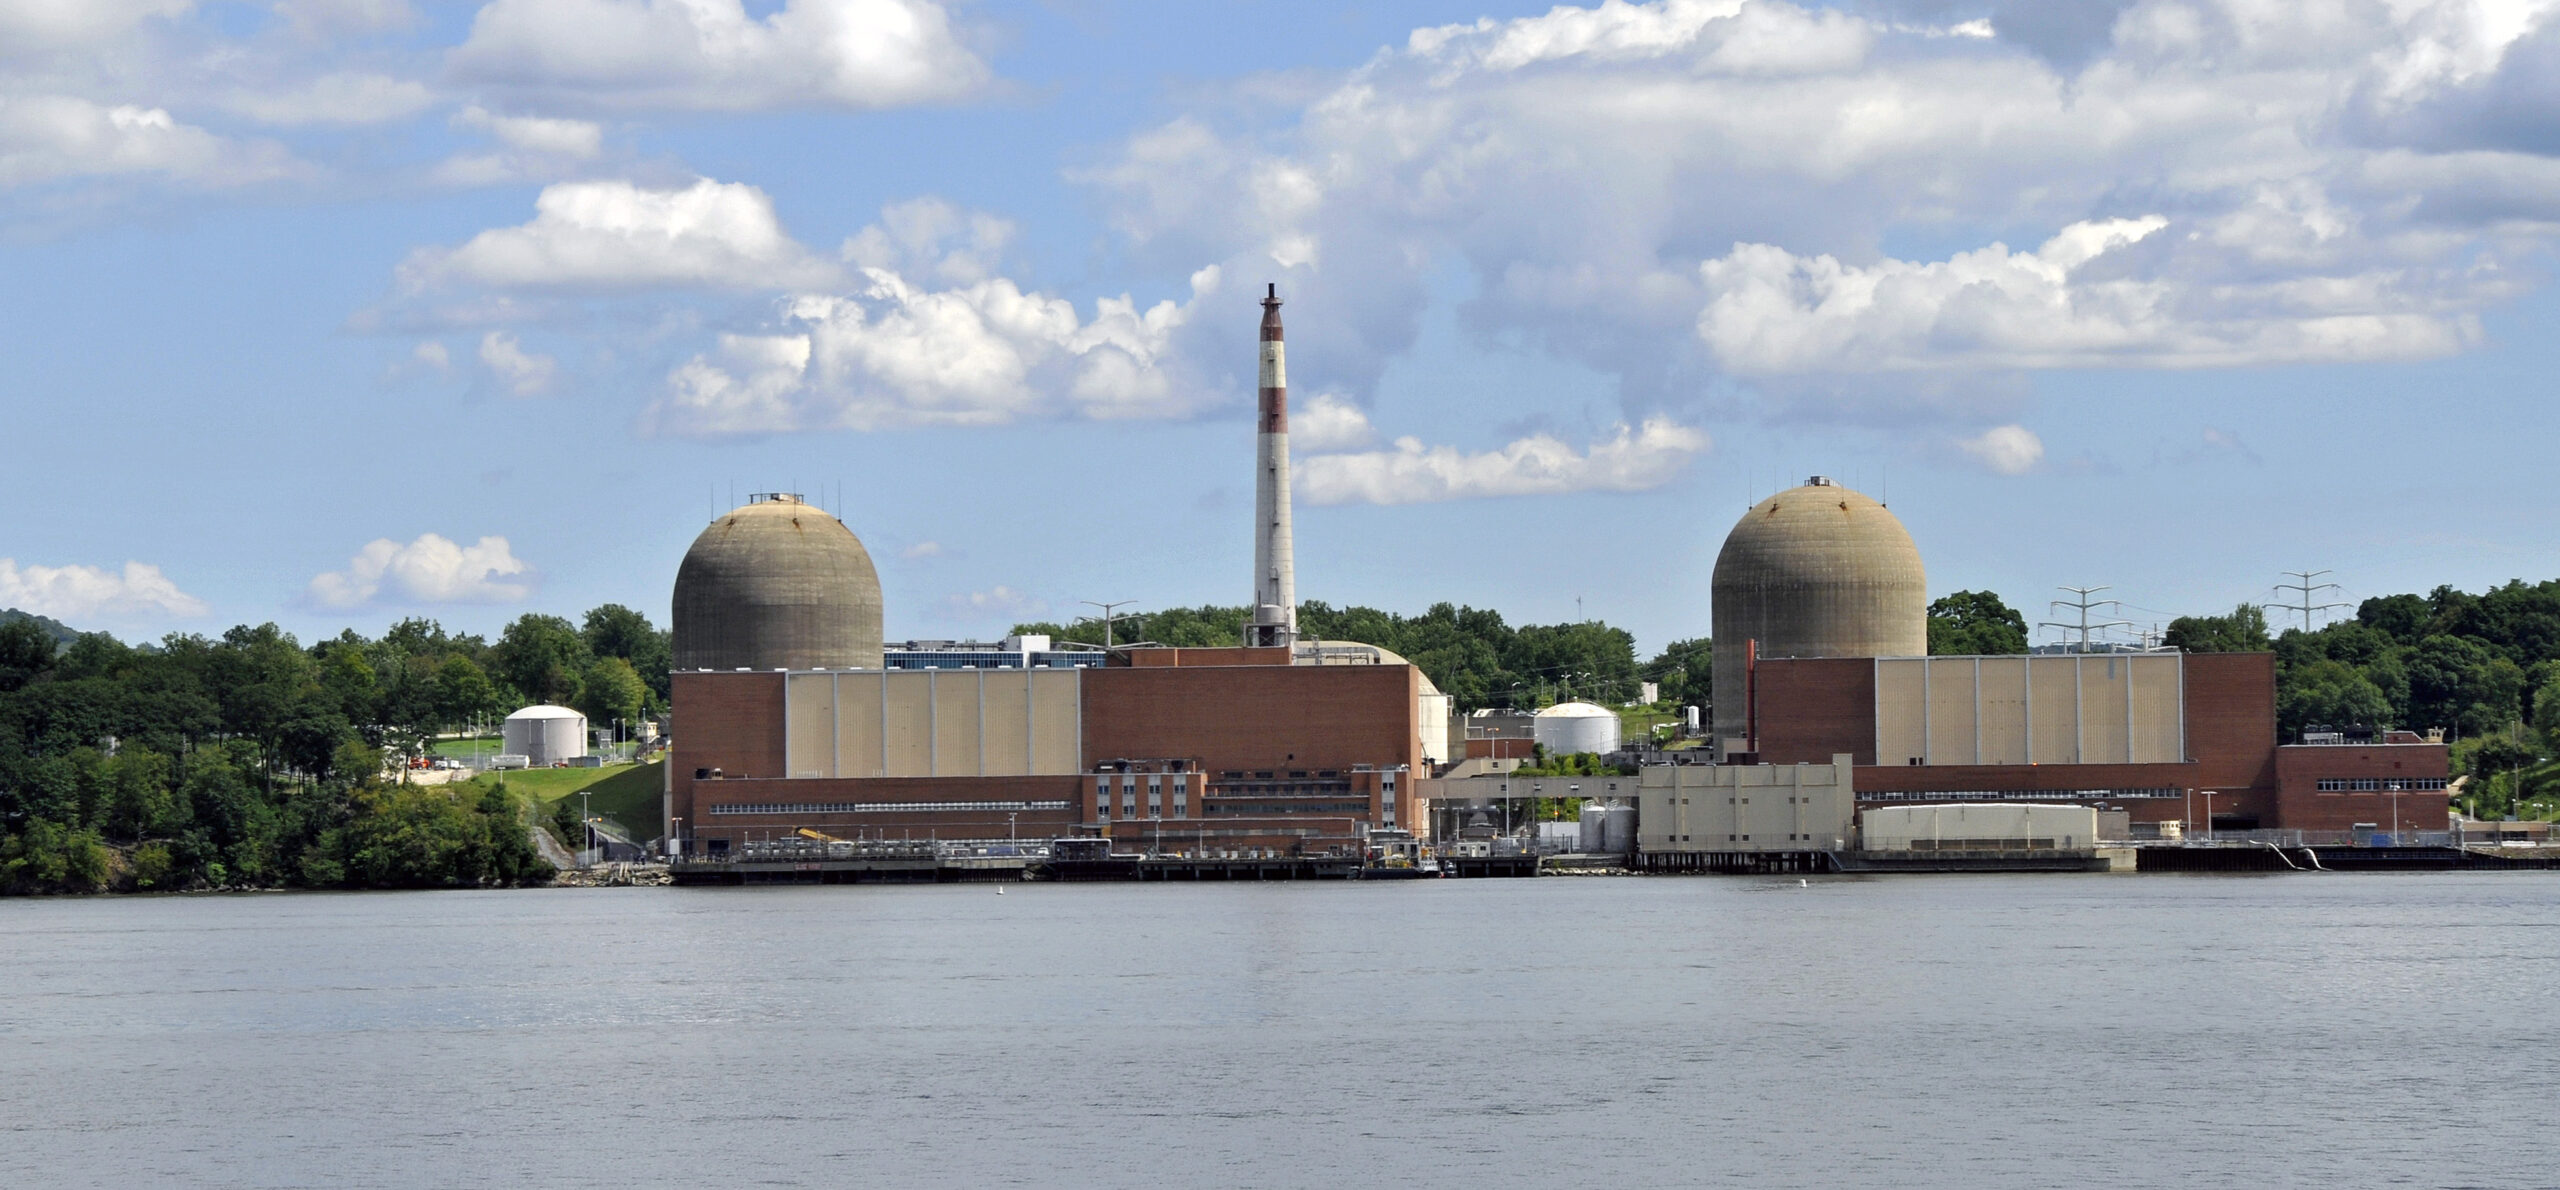 The Indian Point Energy Center, in Buchanan in the US state of New York, was the site of the first thorium reactor in the world